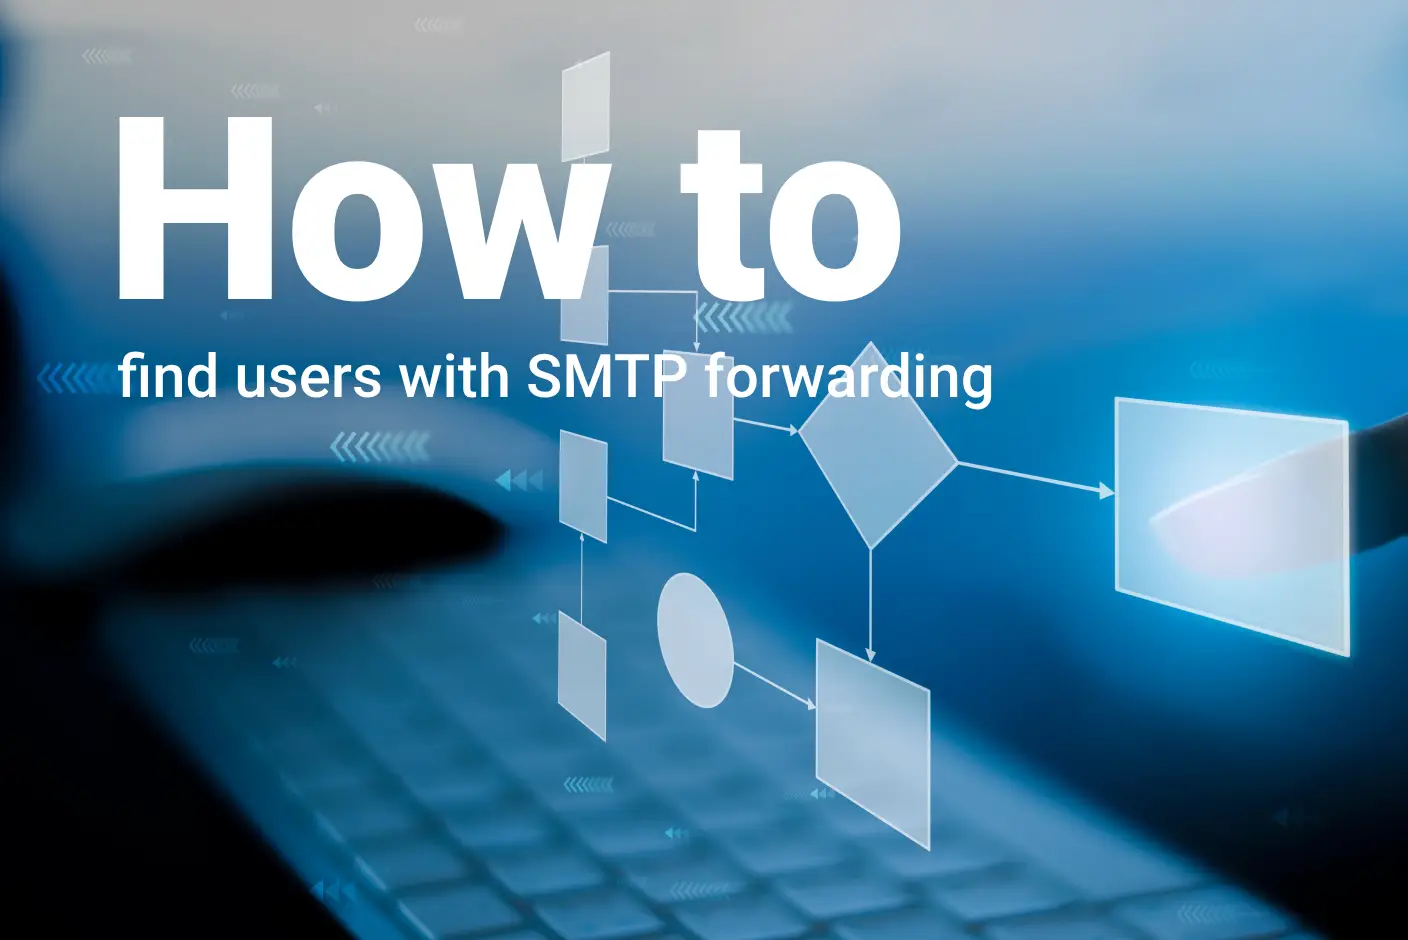 How to find users with an SMTP forwarding email